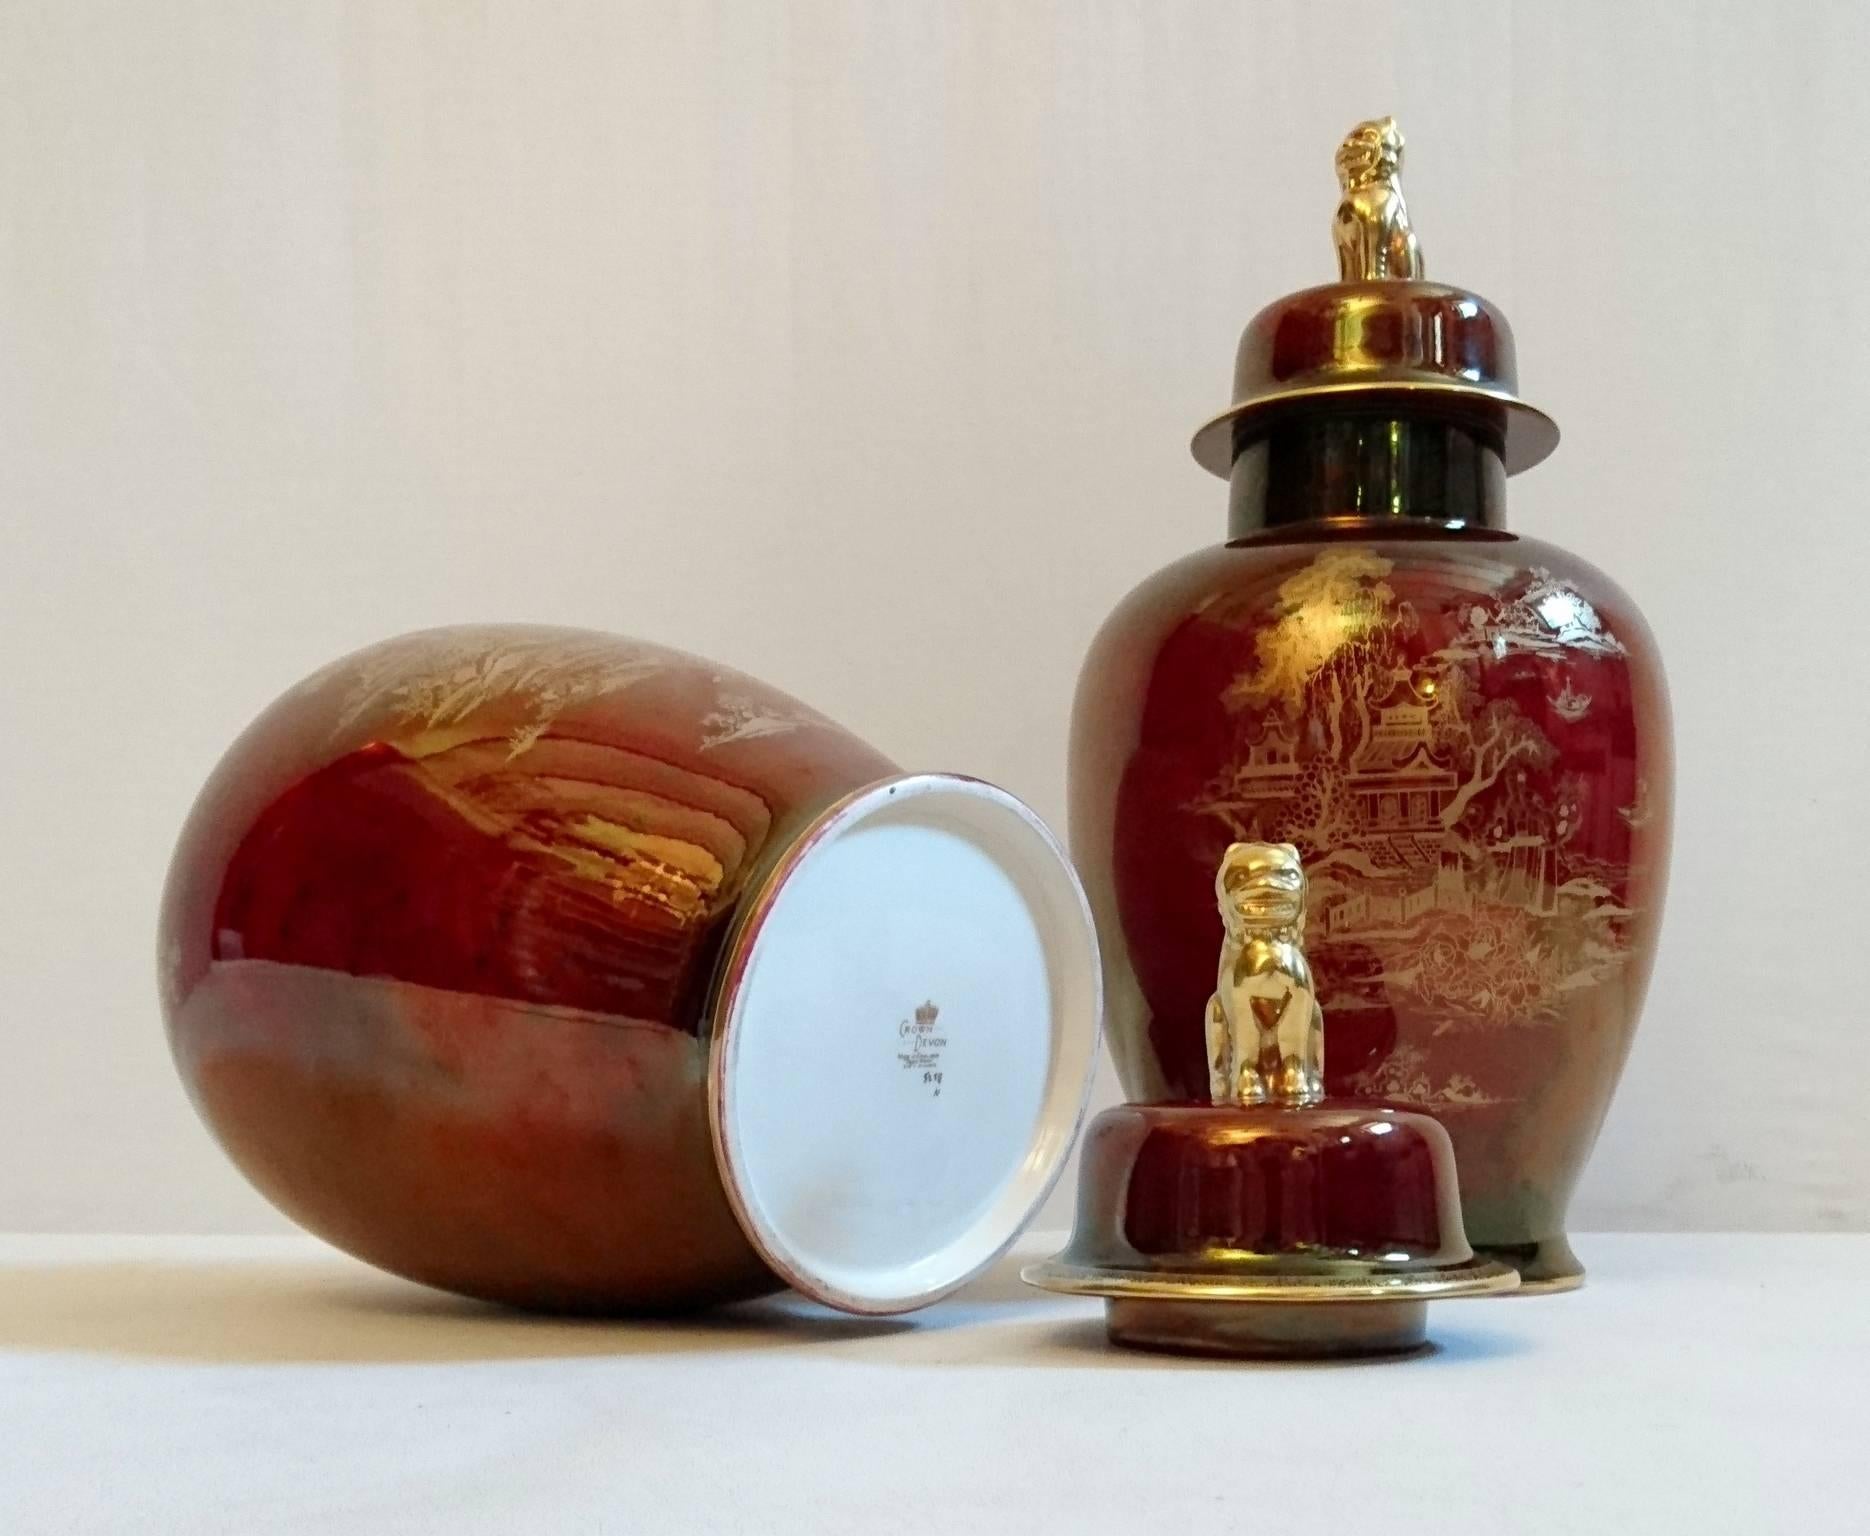 Ruby colored pair of lidded porcelain urns by Crown Devon Fieldings with gold chinoiserie motifs. The lids are crowned with lions in gold. Both urns and lids in perfect condition and without chipping or fading. Stamped in the base and numbered.